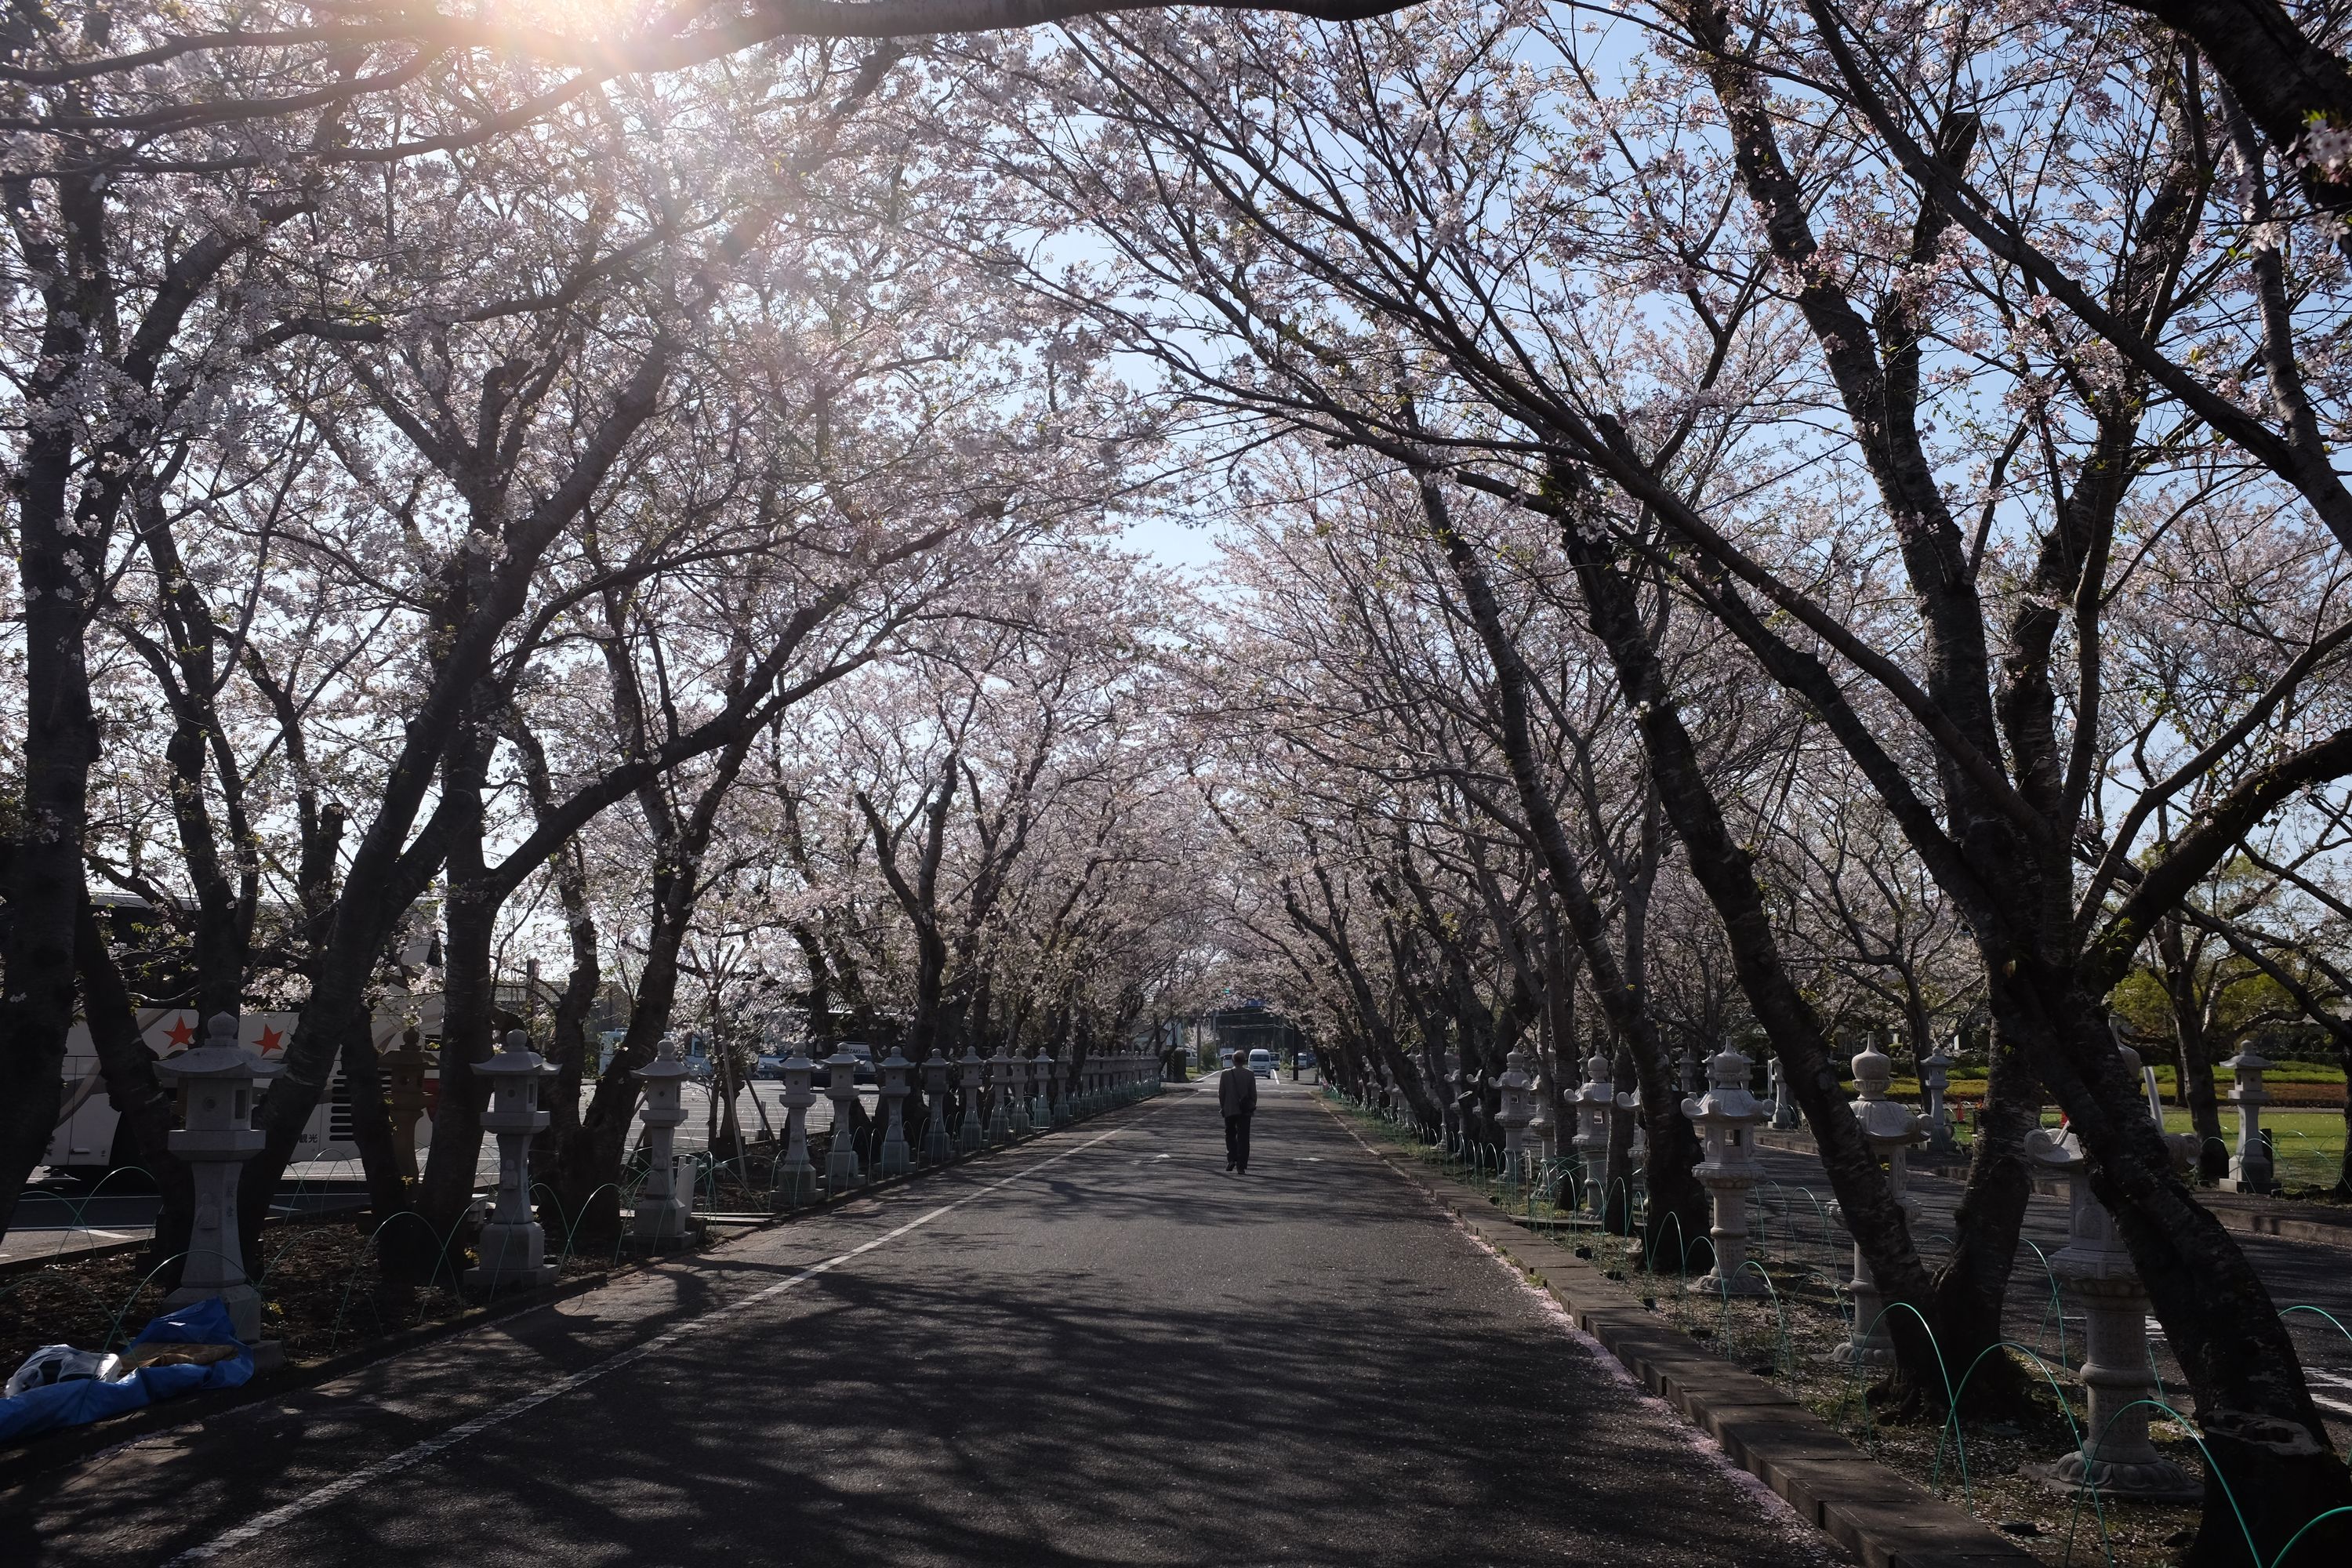 A man walks down an avenue of cherry blossoms in the afternoon sun.